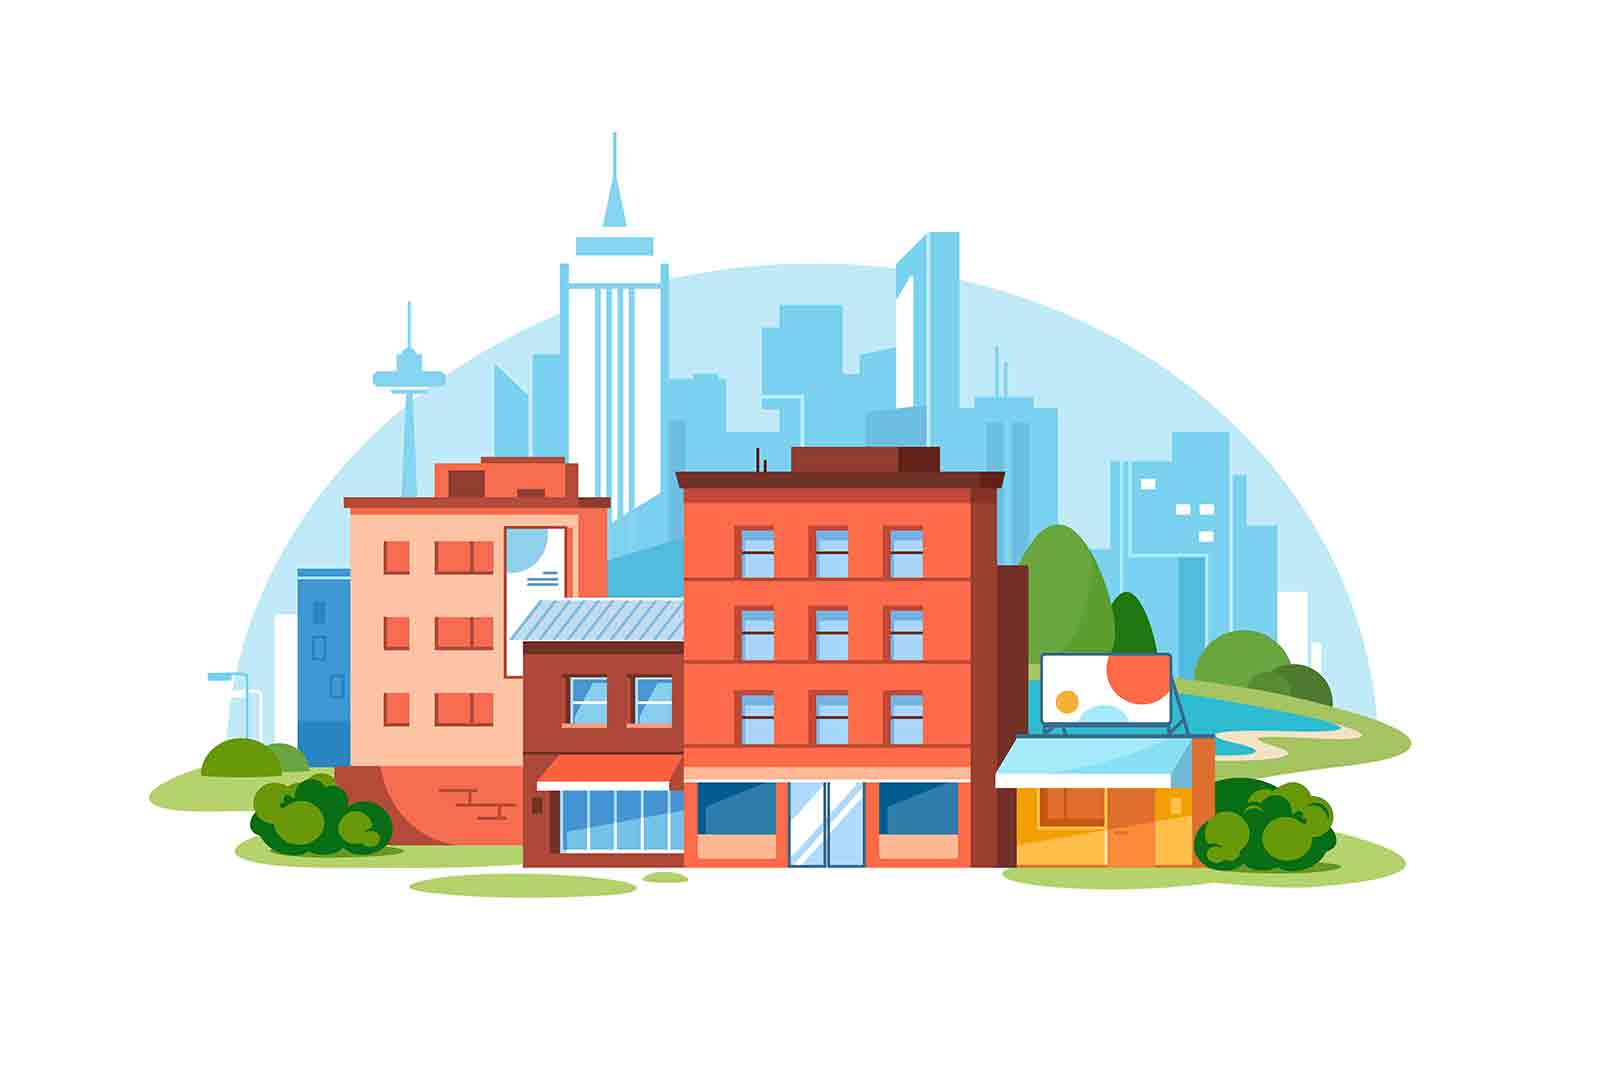 Urban landscape with skyscraper and multi-storey buildings vector illustration. City downtown. Modern cityscape flat style concept